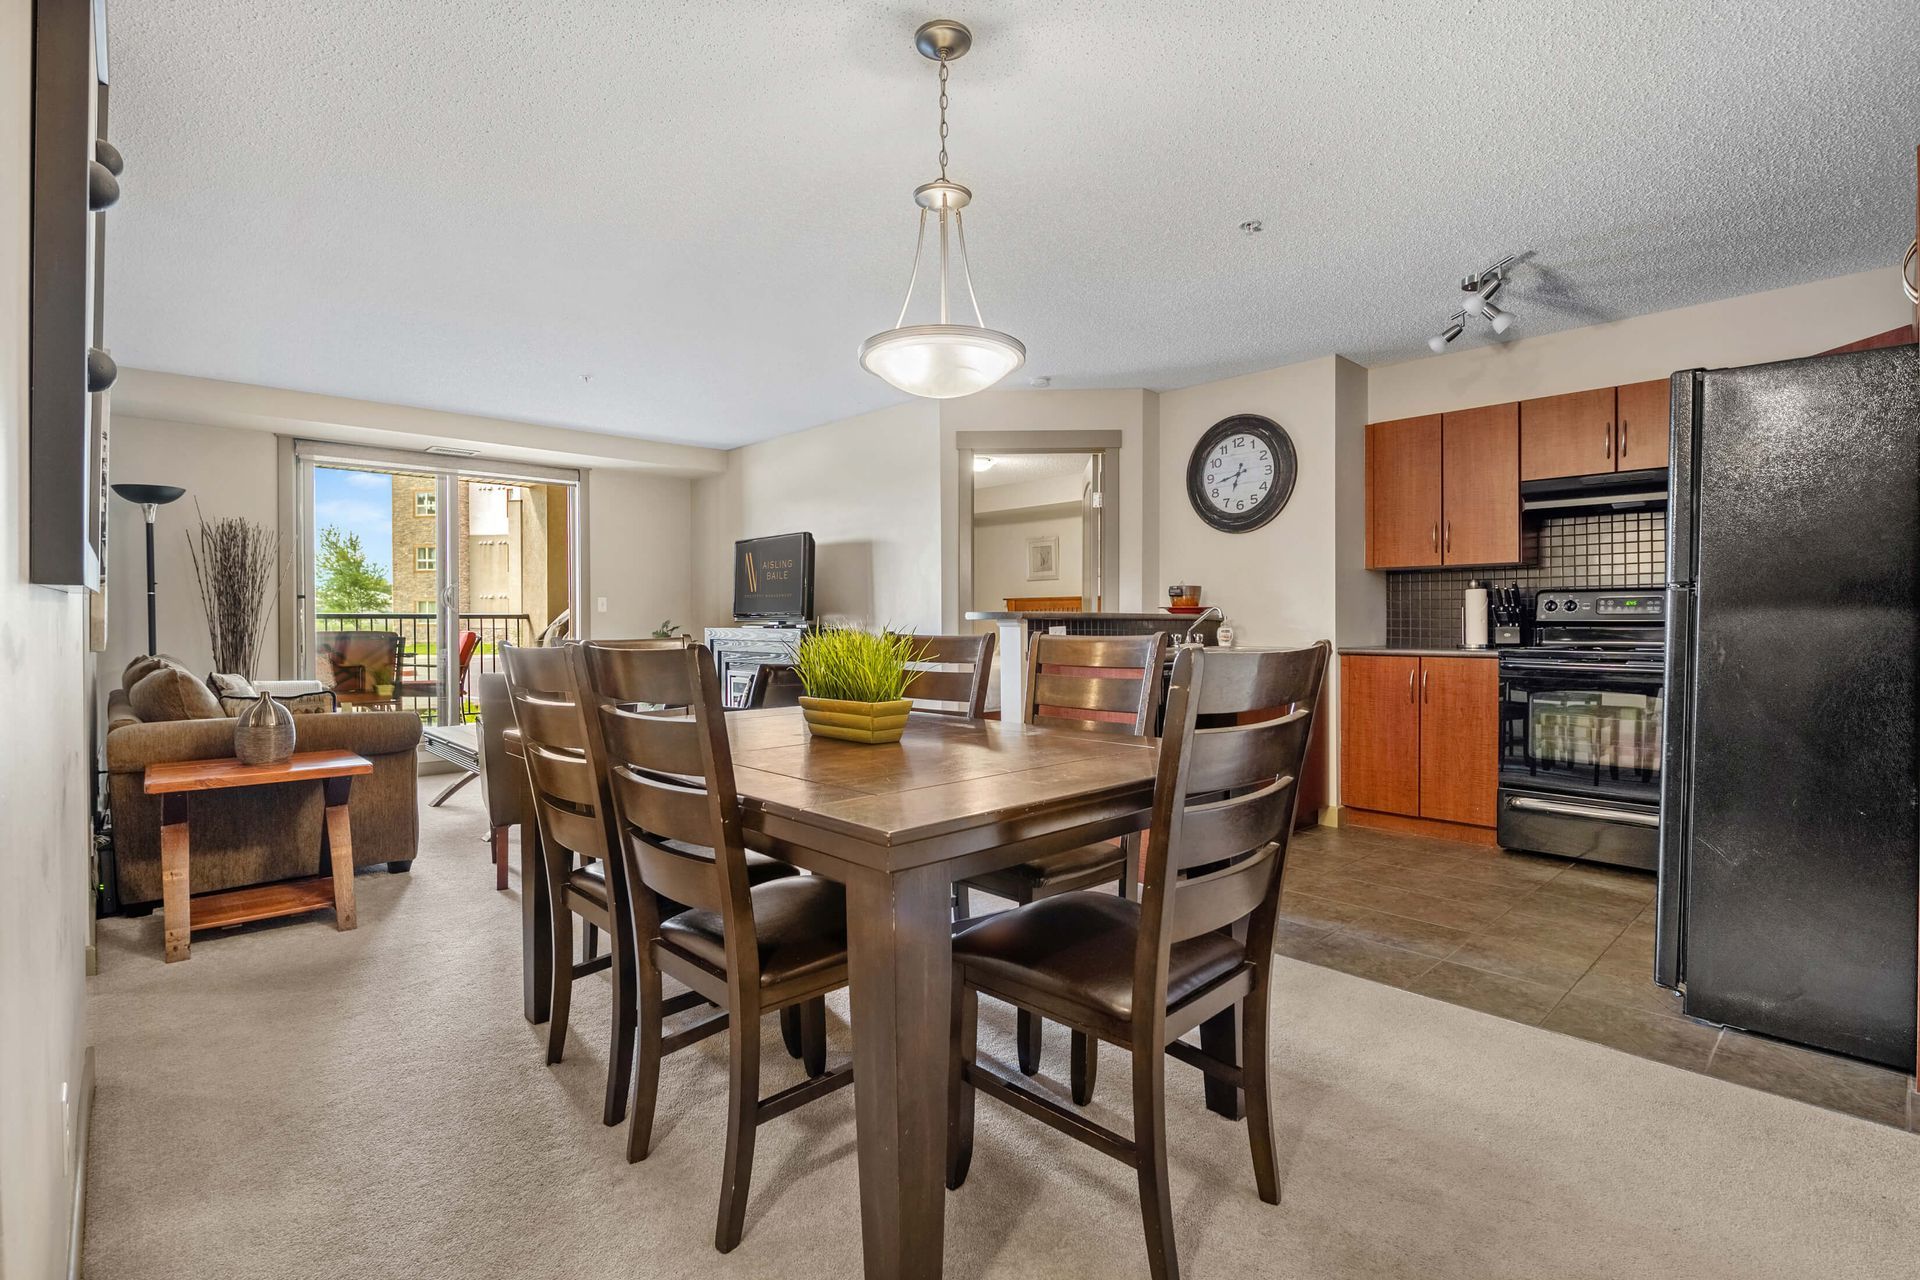 Living room and dining area at the Lake Windermere Pointe Condos in Invermere, BC managed by Aisling Baile Property Management